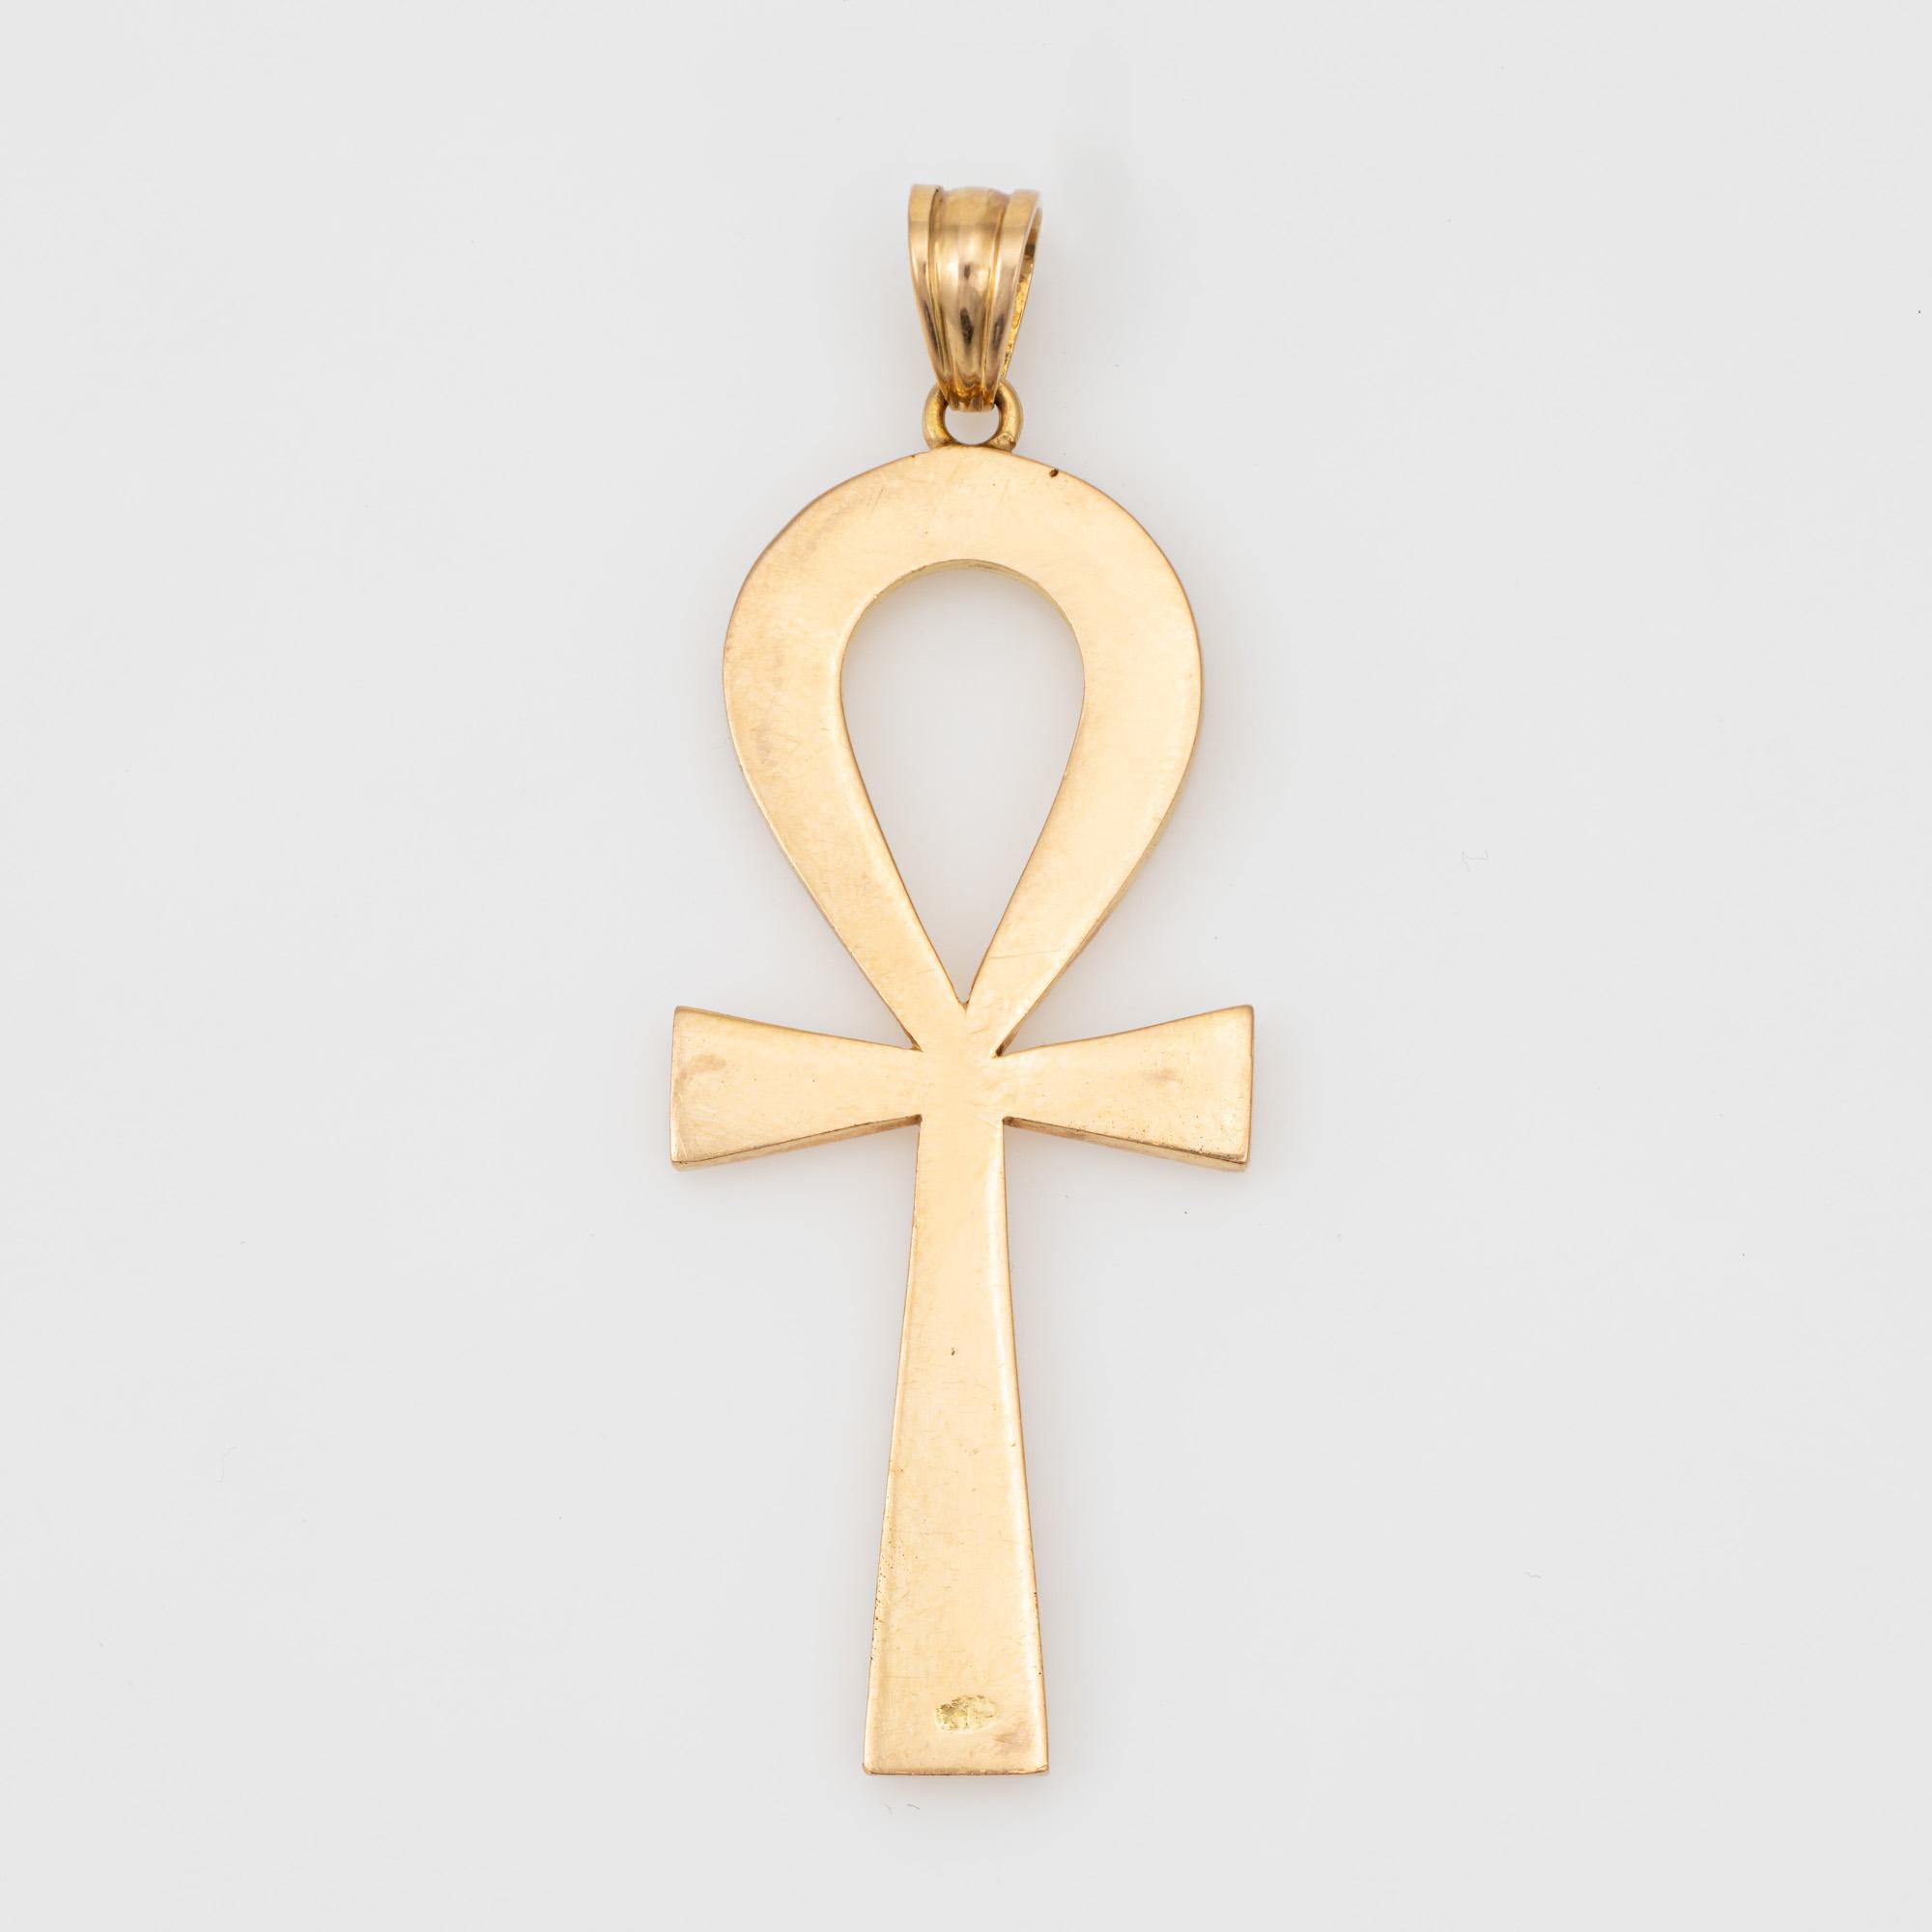 Stylish Egyptian Ankh pendant crafted in 14k yellow gold (circa 1970s to 1980s).  

The Ankh or 'Key of Life' is an ancient Egyptian hieroglyph to represent the word for life. The pendant is large in scale (2 inches in length) and is great worn as a